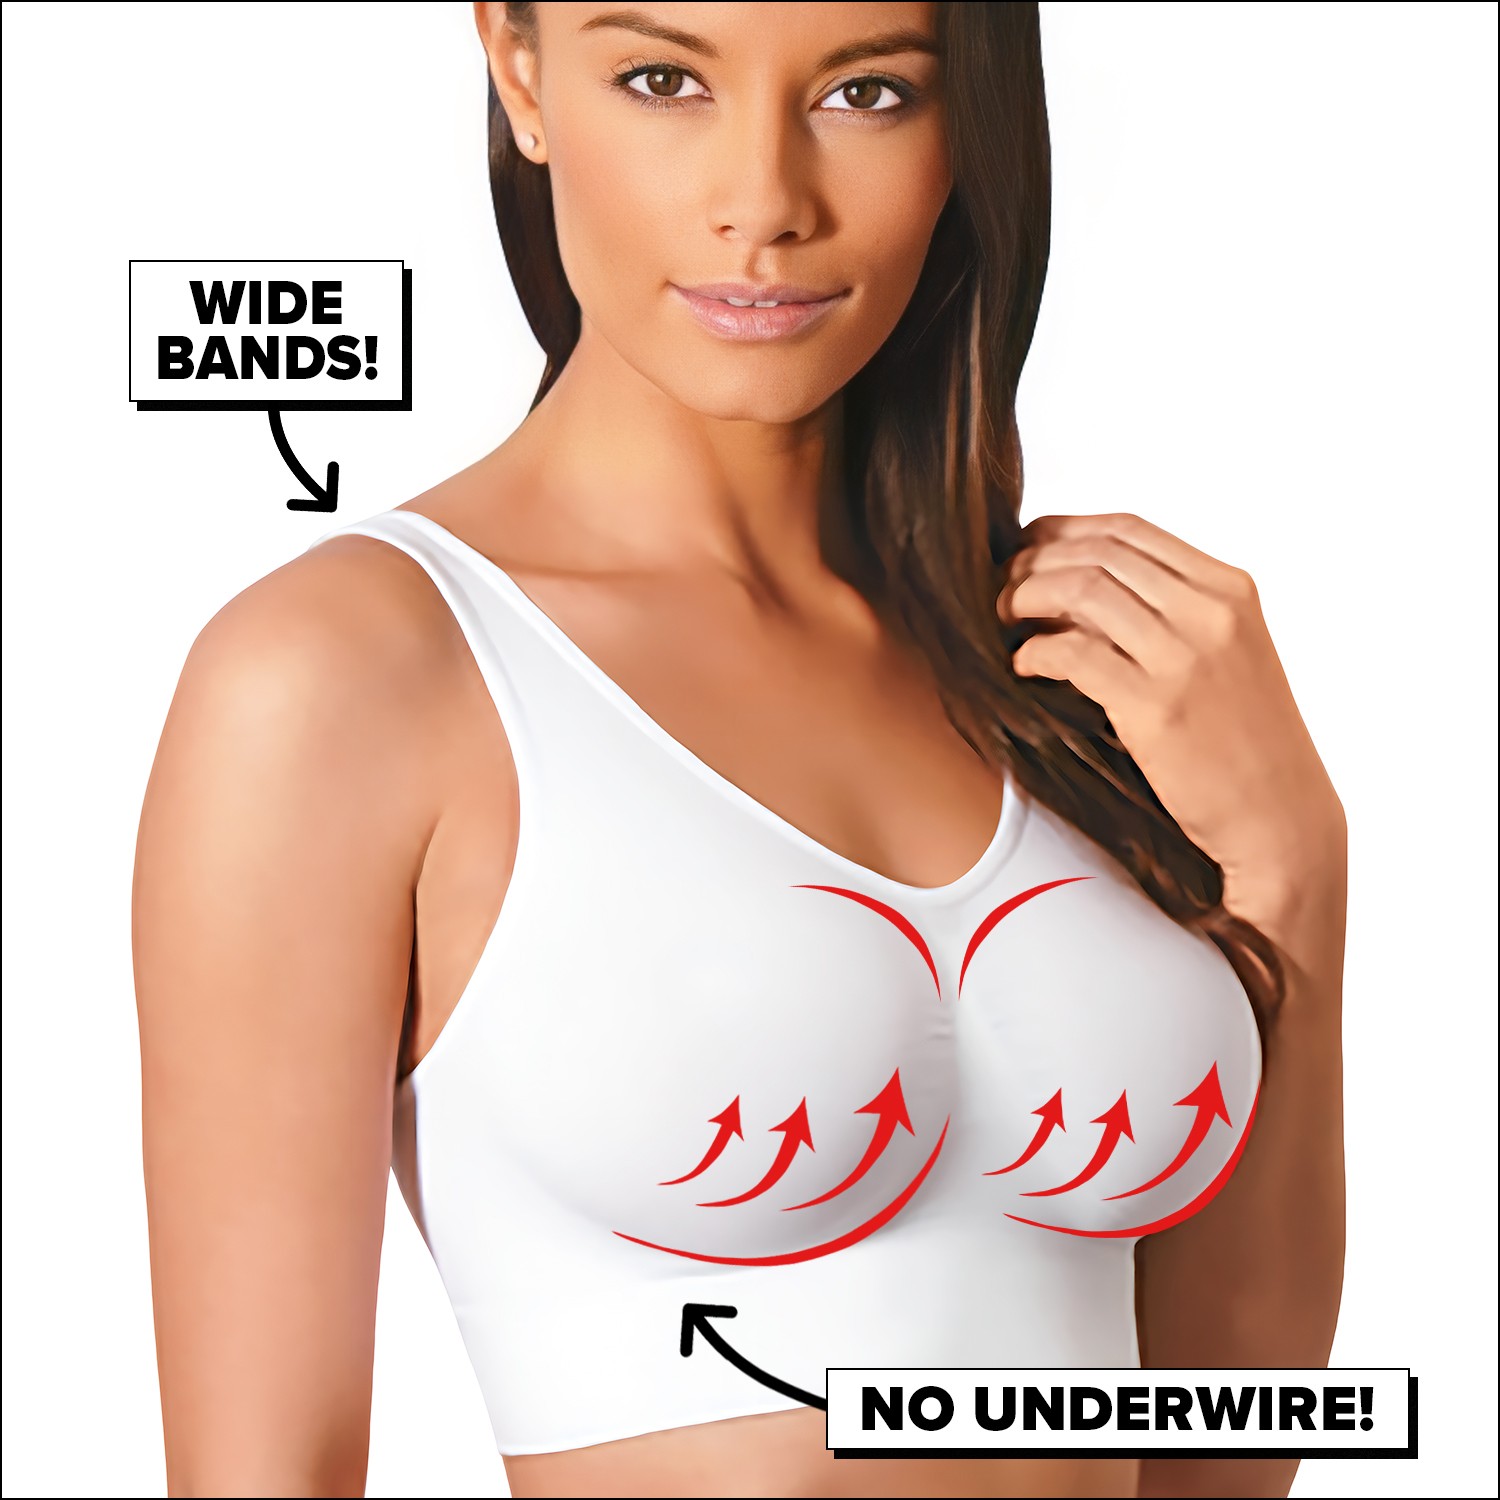 Wide bands and no underwire